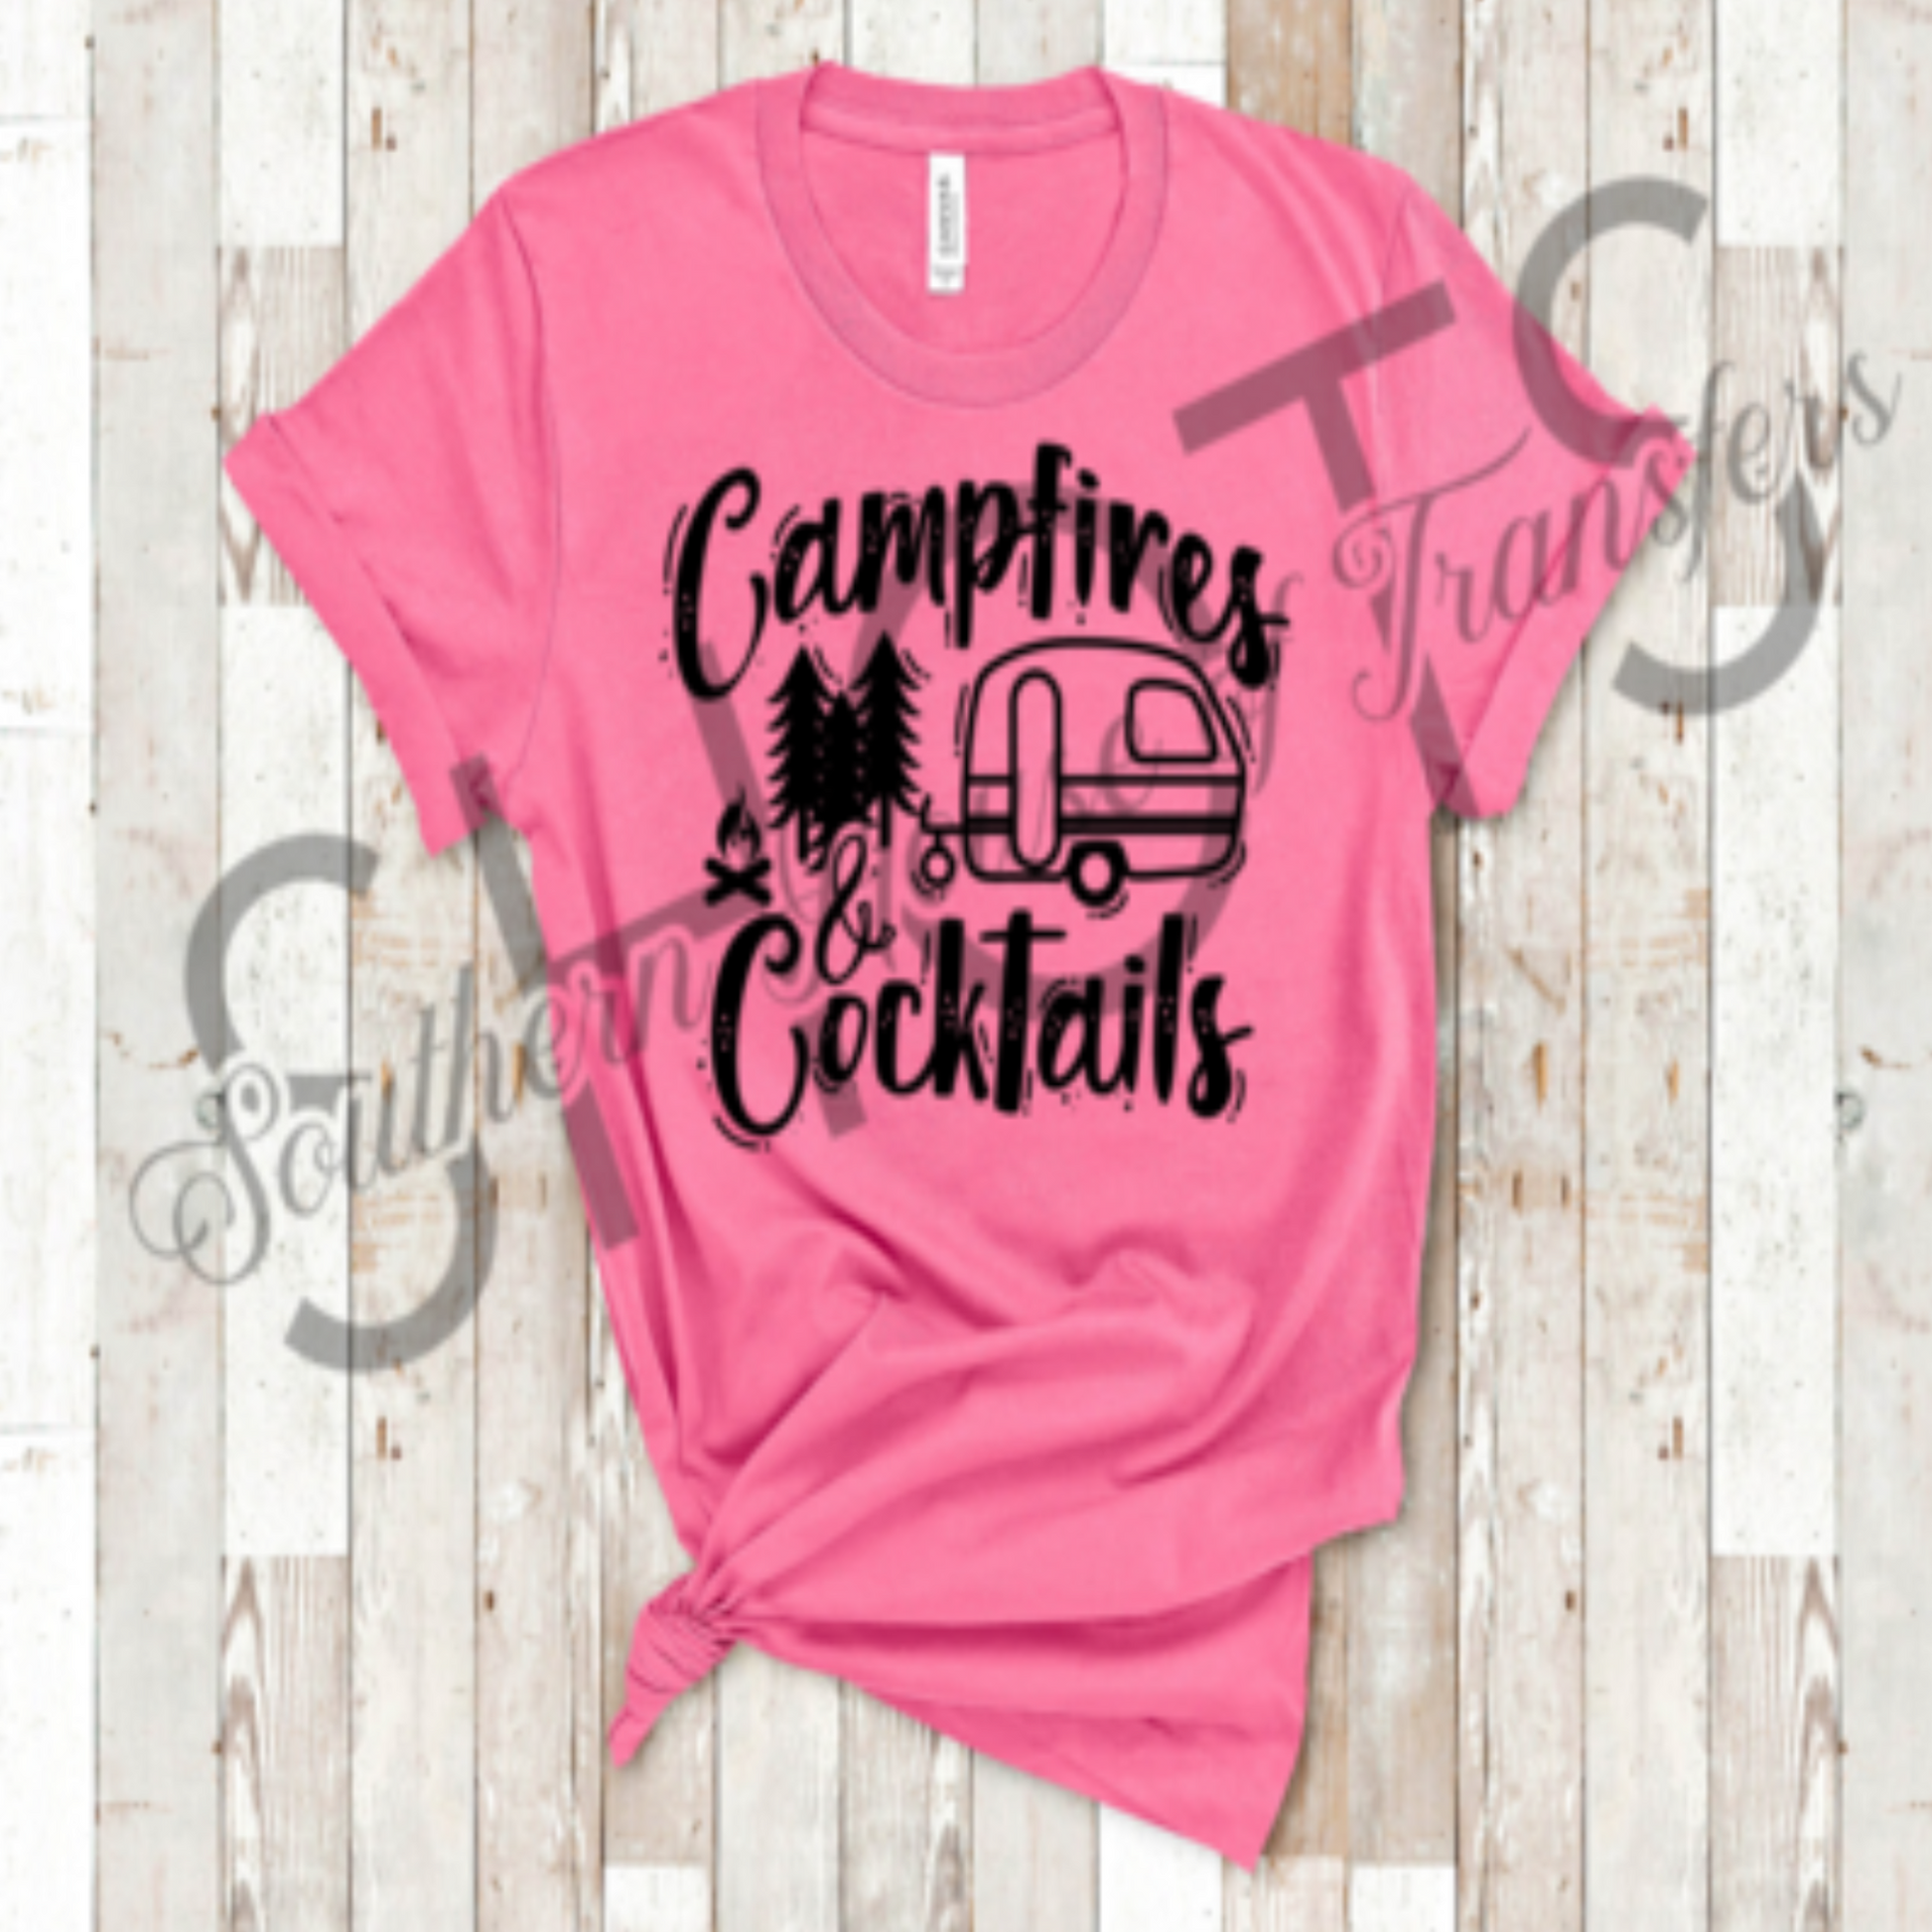 campfires_cocktails specialty tee travel shirt adventure tshirt camp_wear